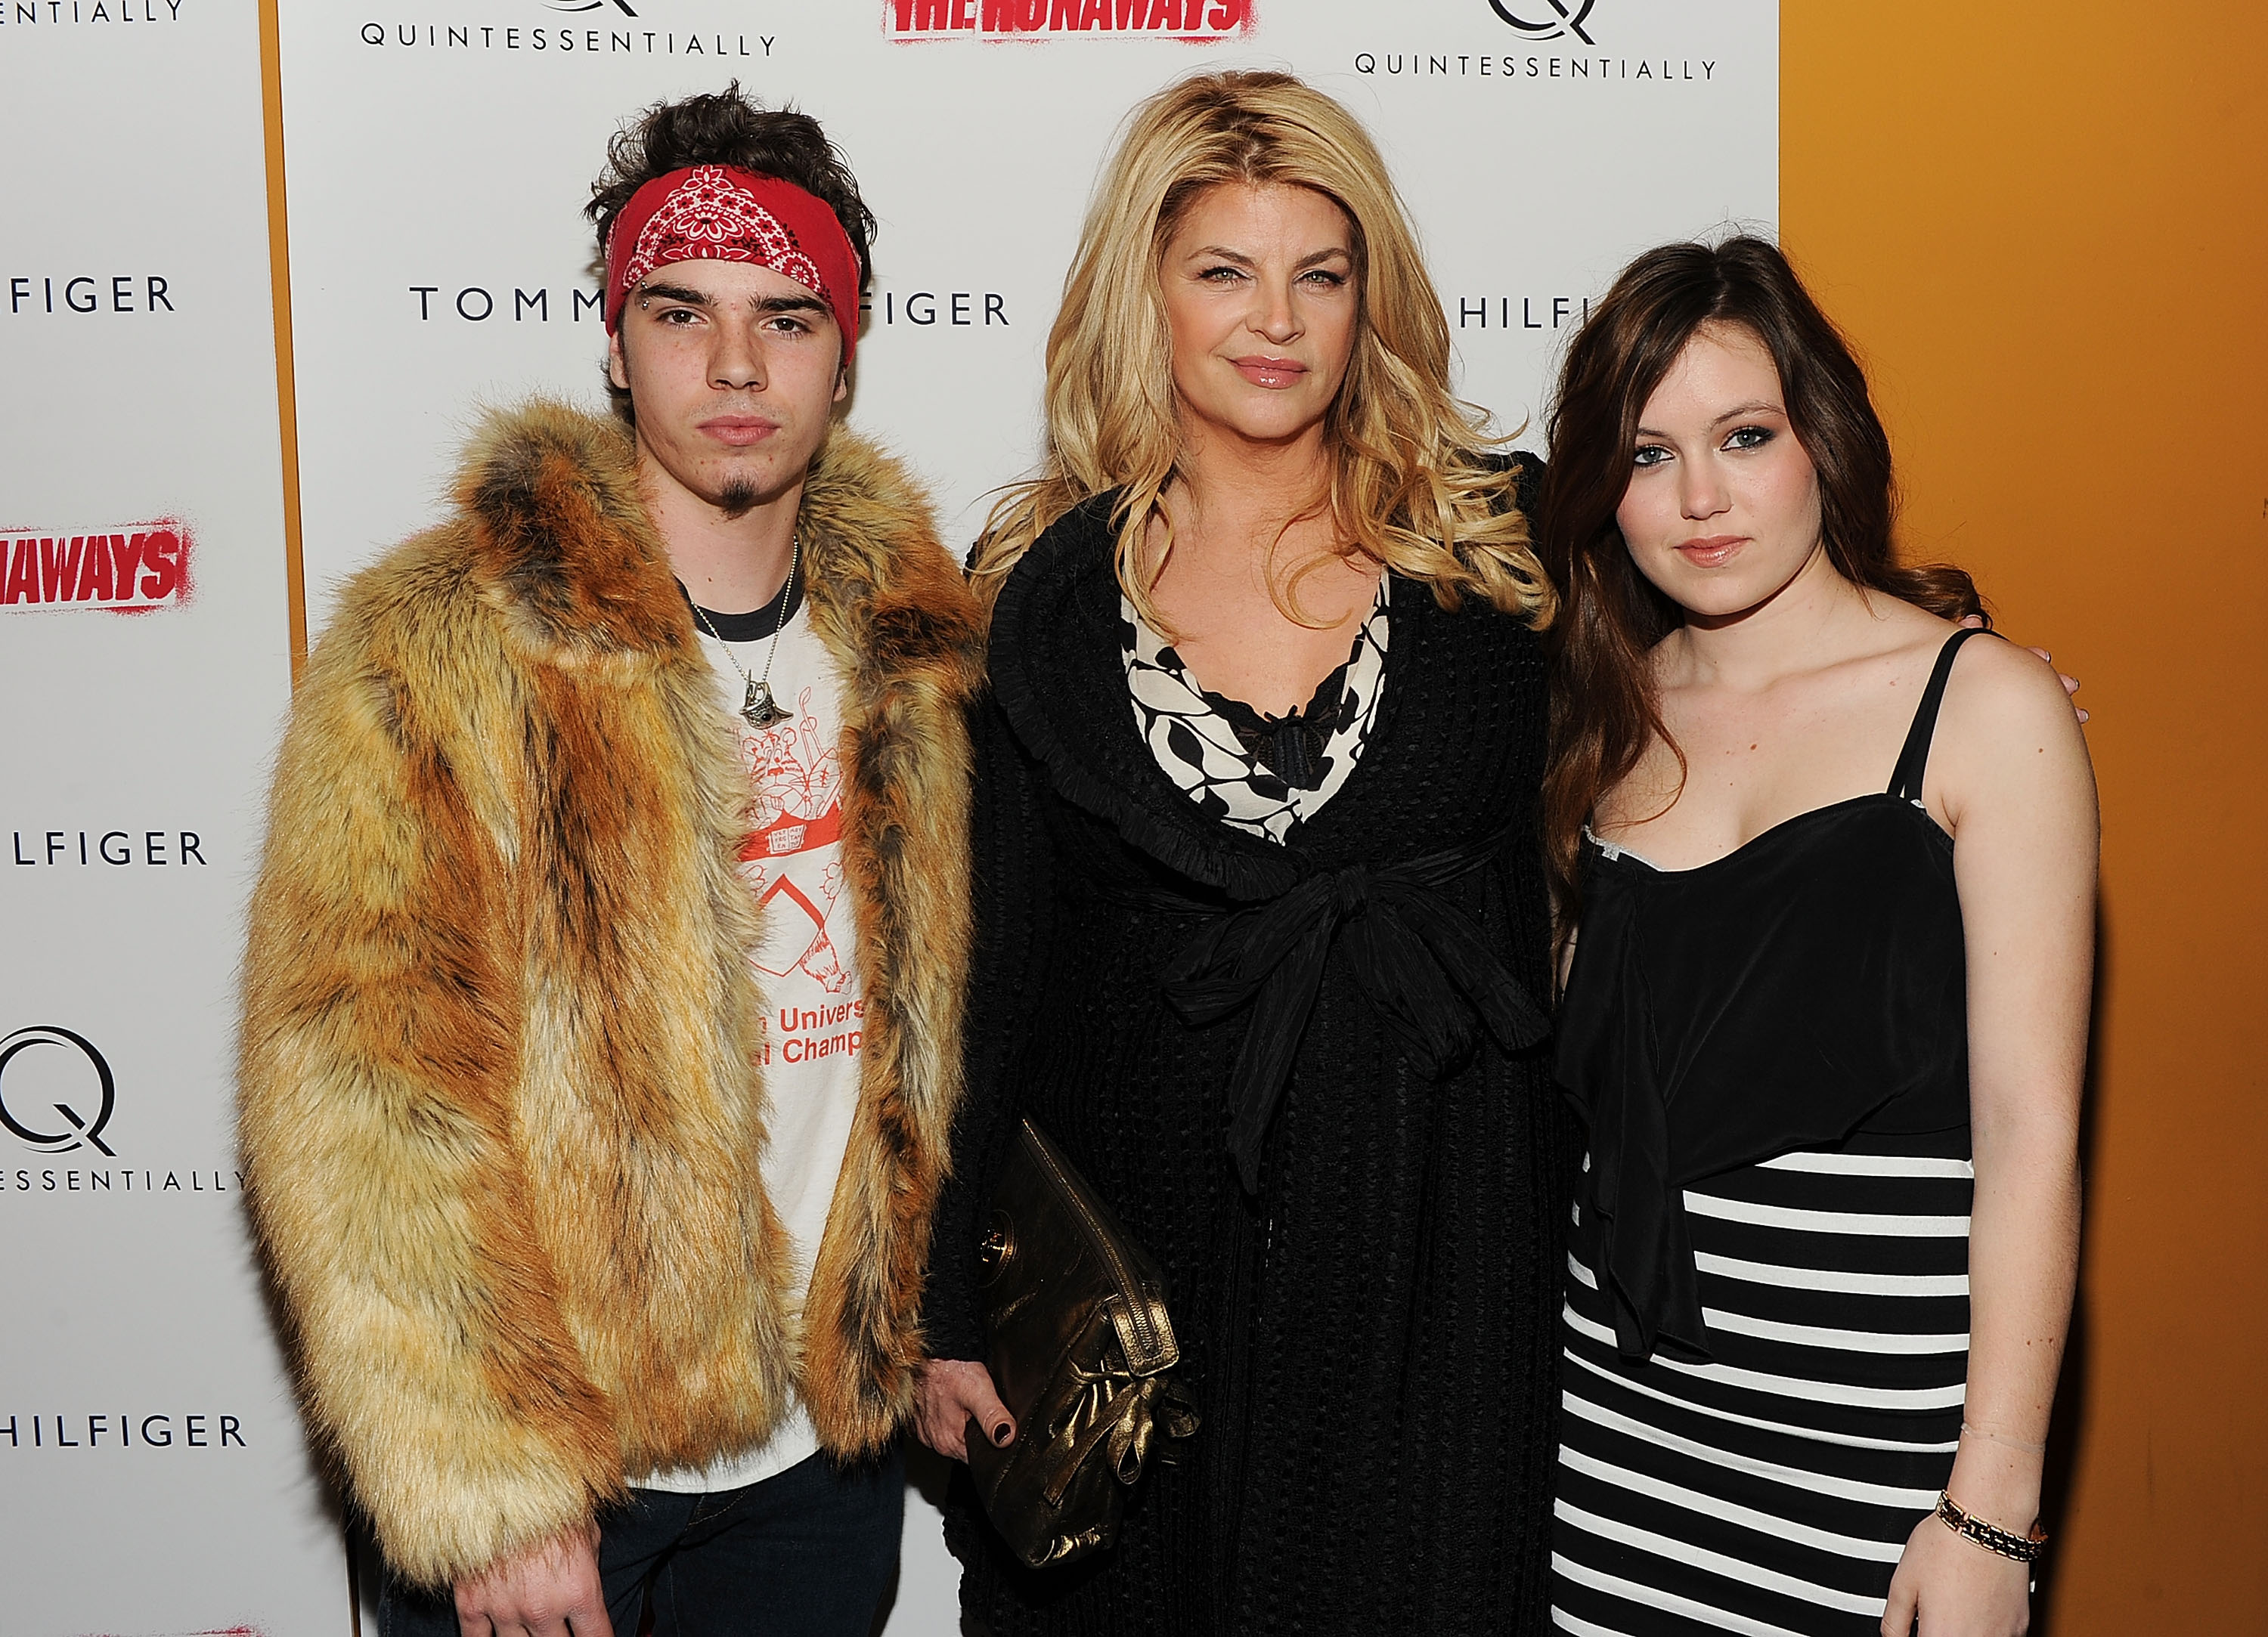 William True, Kirstie Alley, and Lillie Price at the "The Runaways" New York premiere at Landmark Sunshine Cinema in New York City on March 17, 2010. | Source: Getty Images